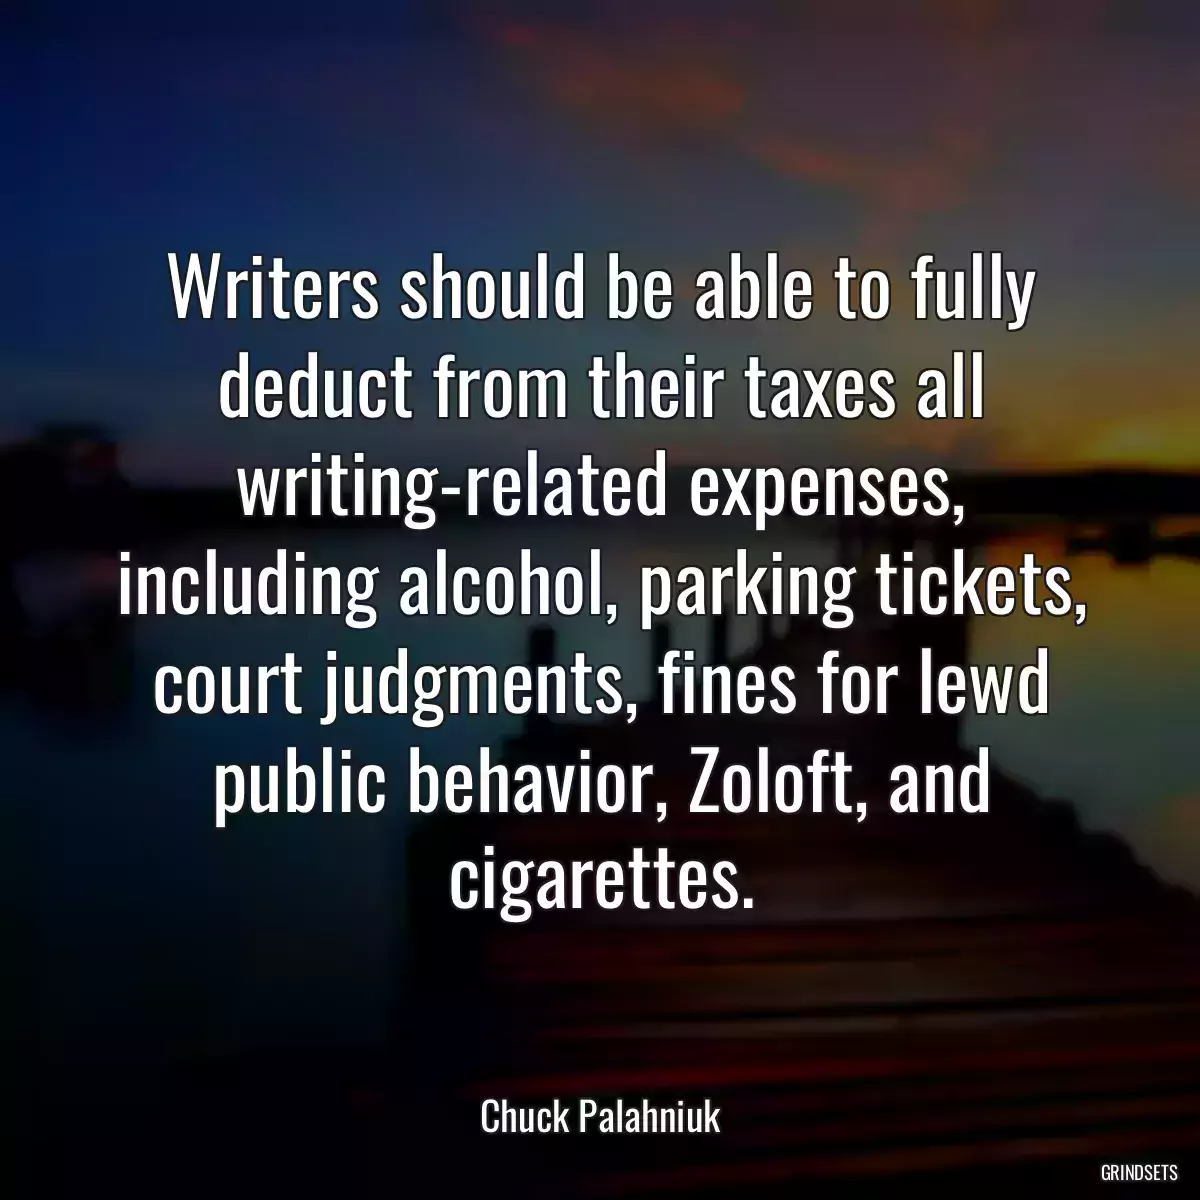 Writers should be able to fully deduct from their taxes all writing-related expenses, including alcohol, parking tickets, court judgments, fines for lewd public behavior, Zoloft, and cigarettes.